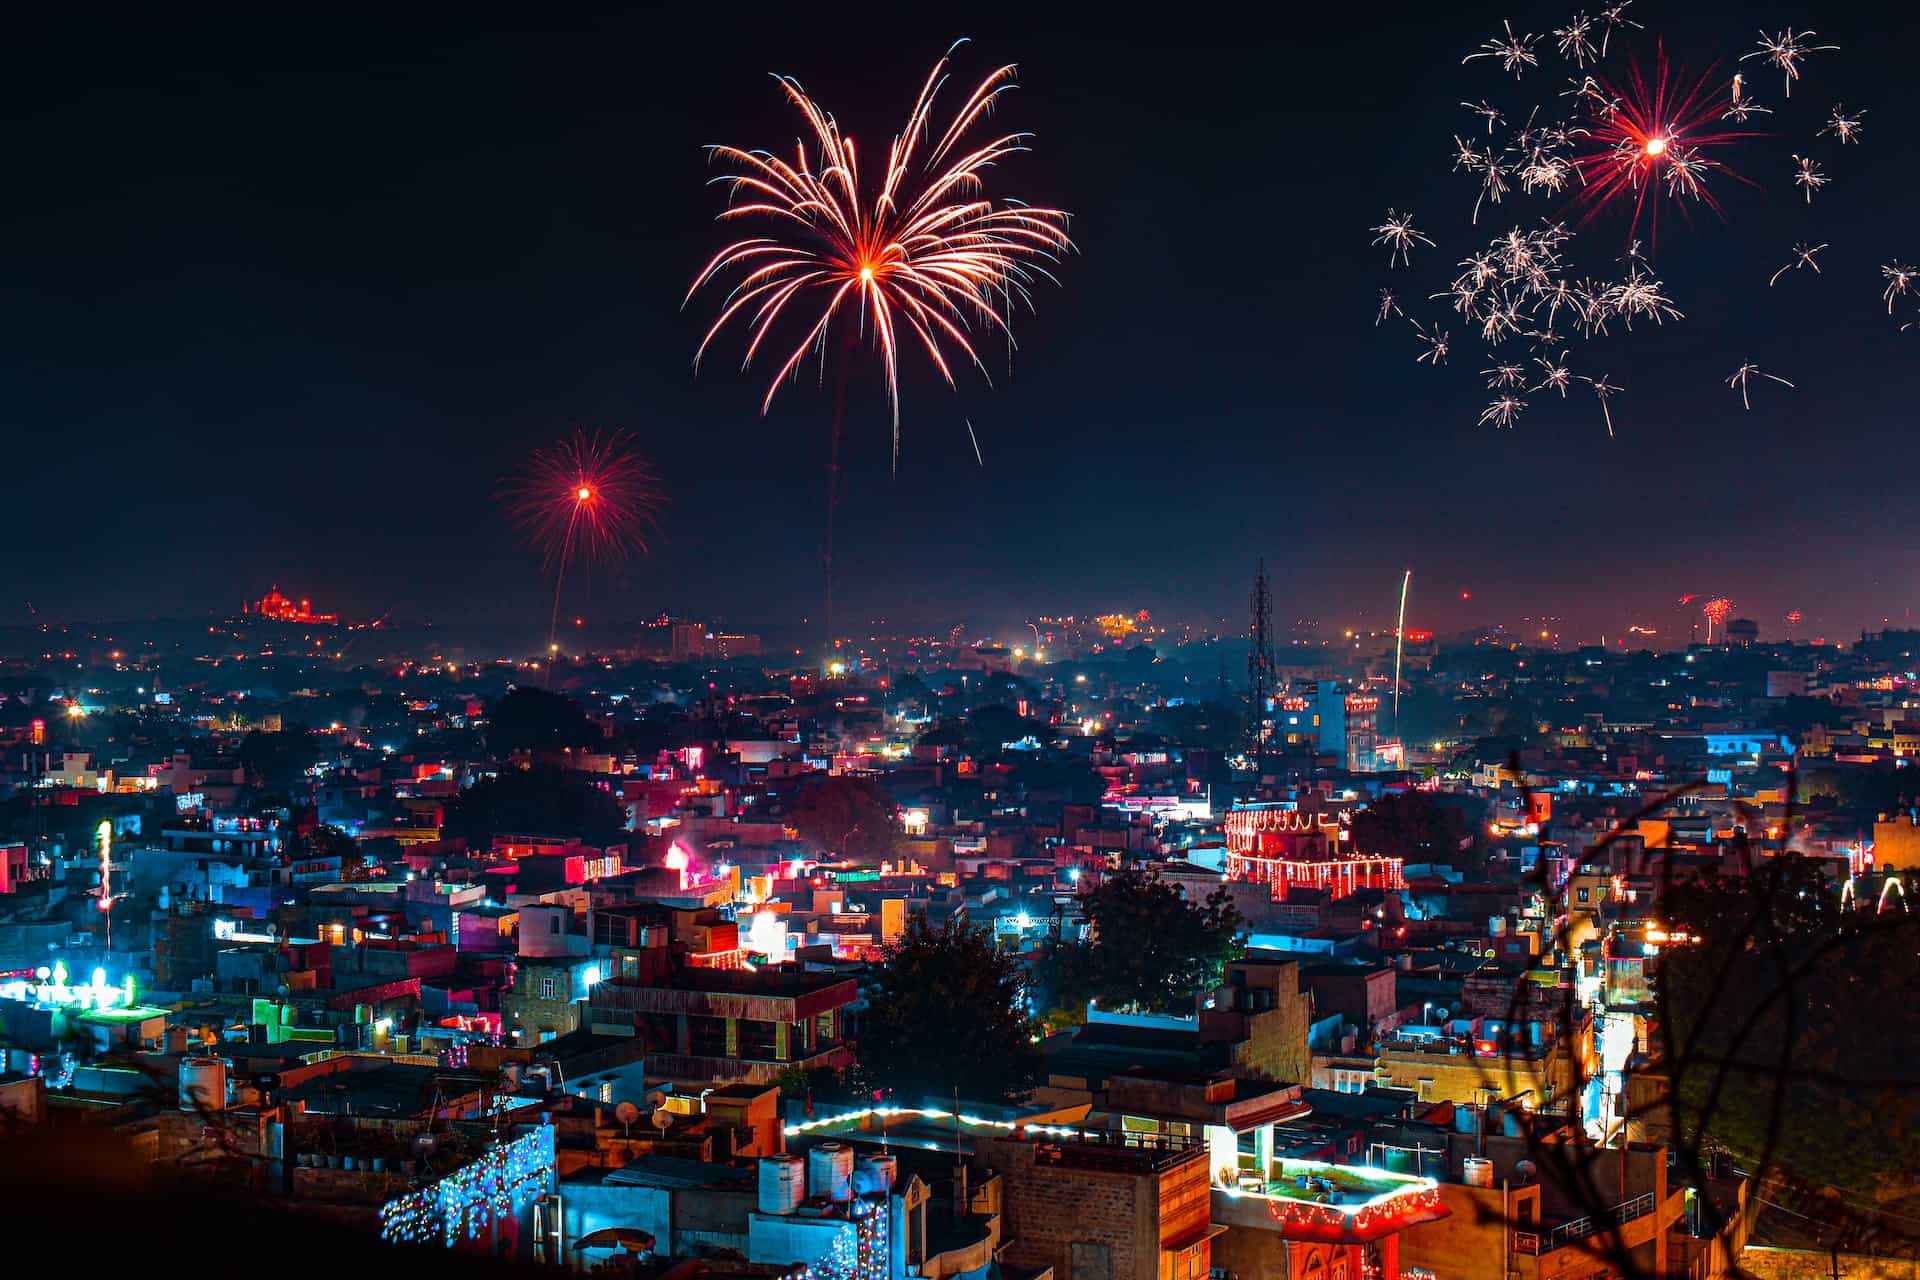 Fireworks over a city in India during Diwali